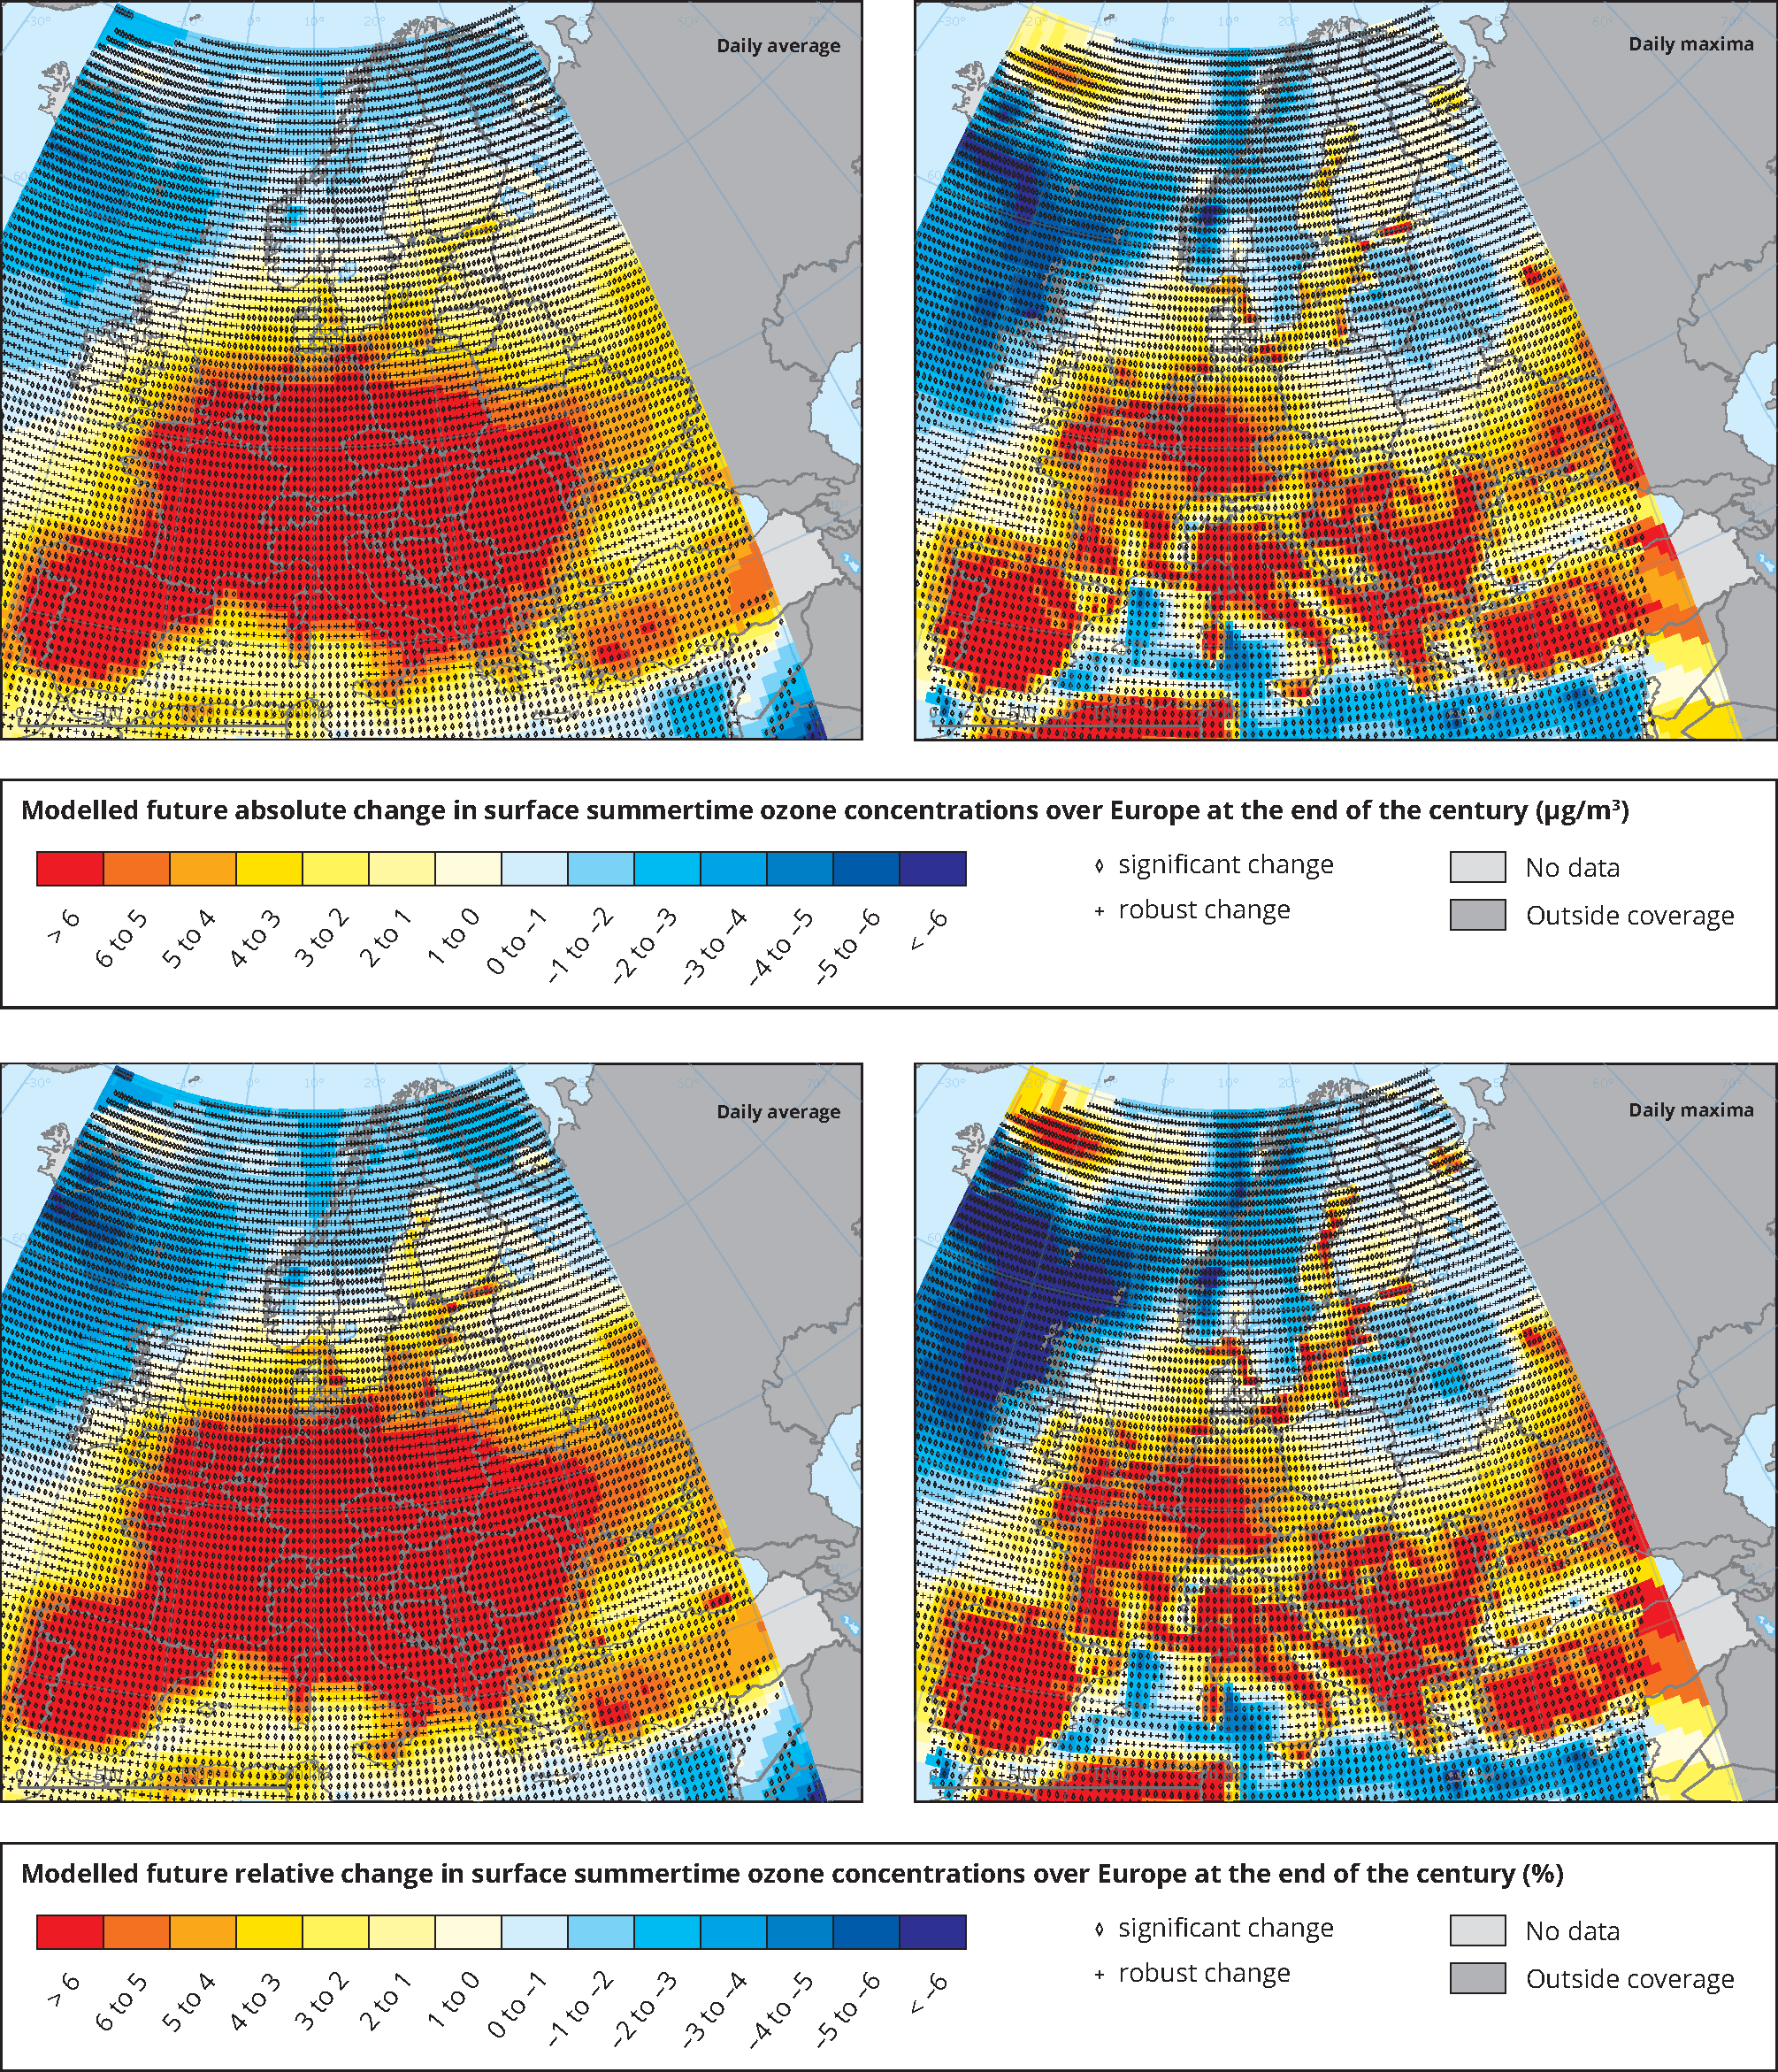 Modelled future change (absolute and relative) in surface summertime ozone concentrations (left: daily average, right: daily maxima) over Europe at the end of the century